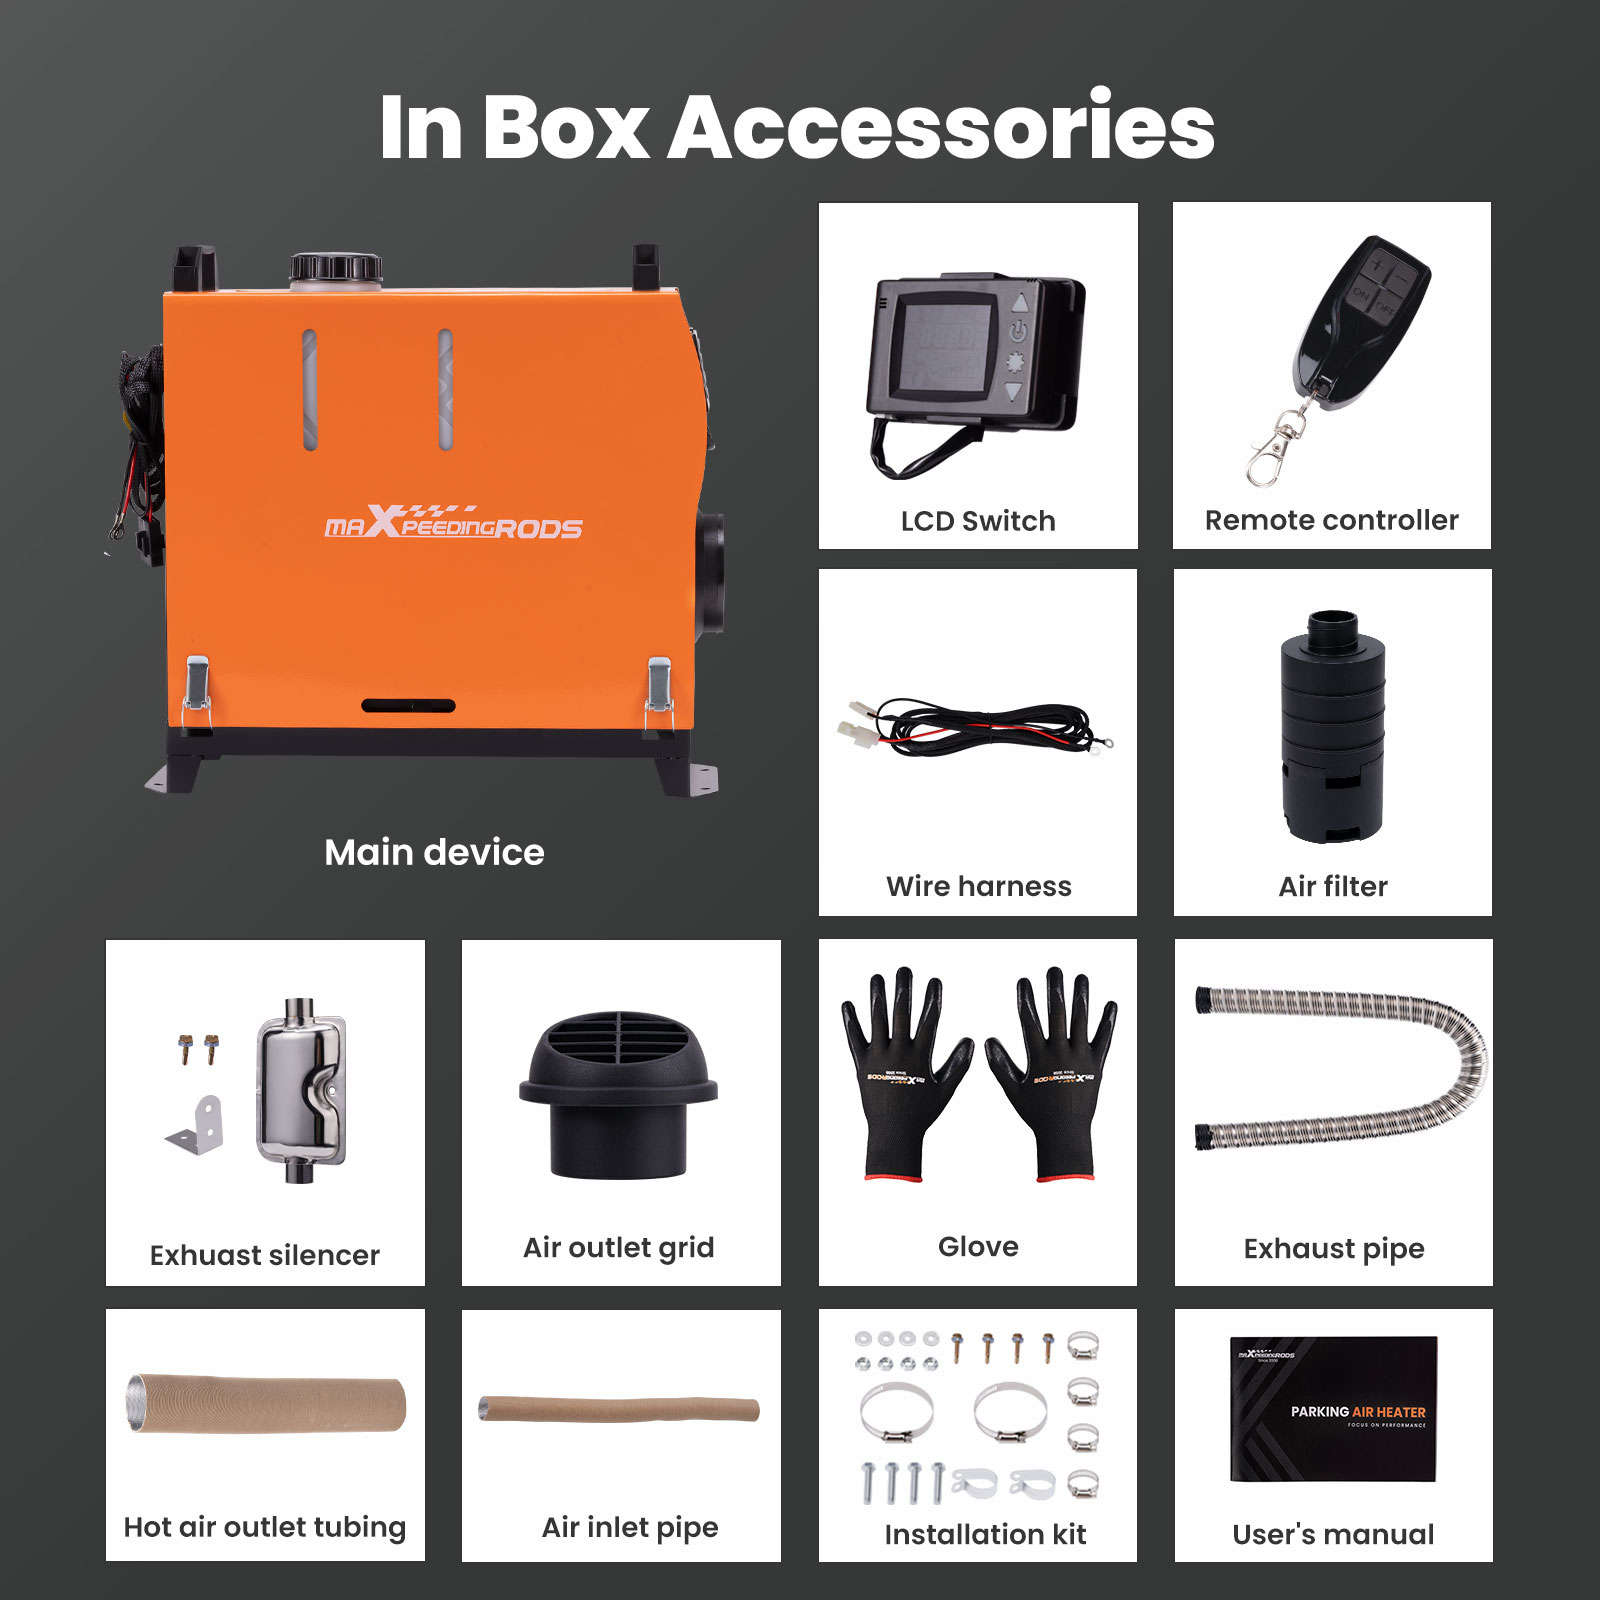 Chop Box - Standard Size - Shop For All School Items In Ghana